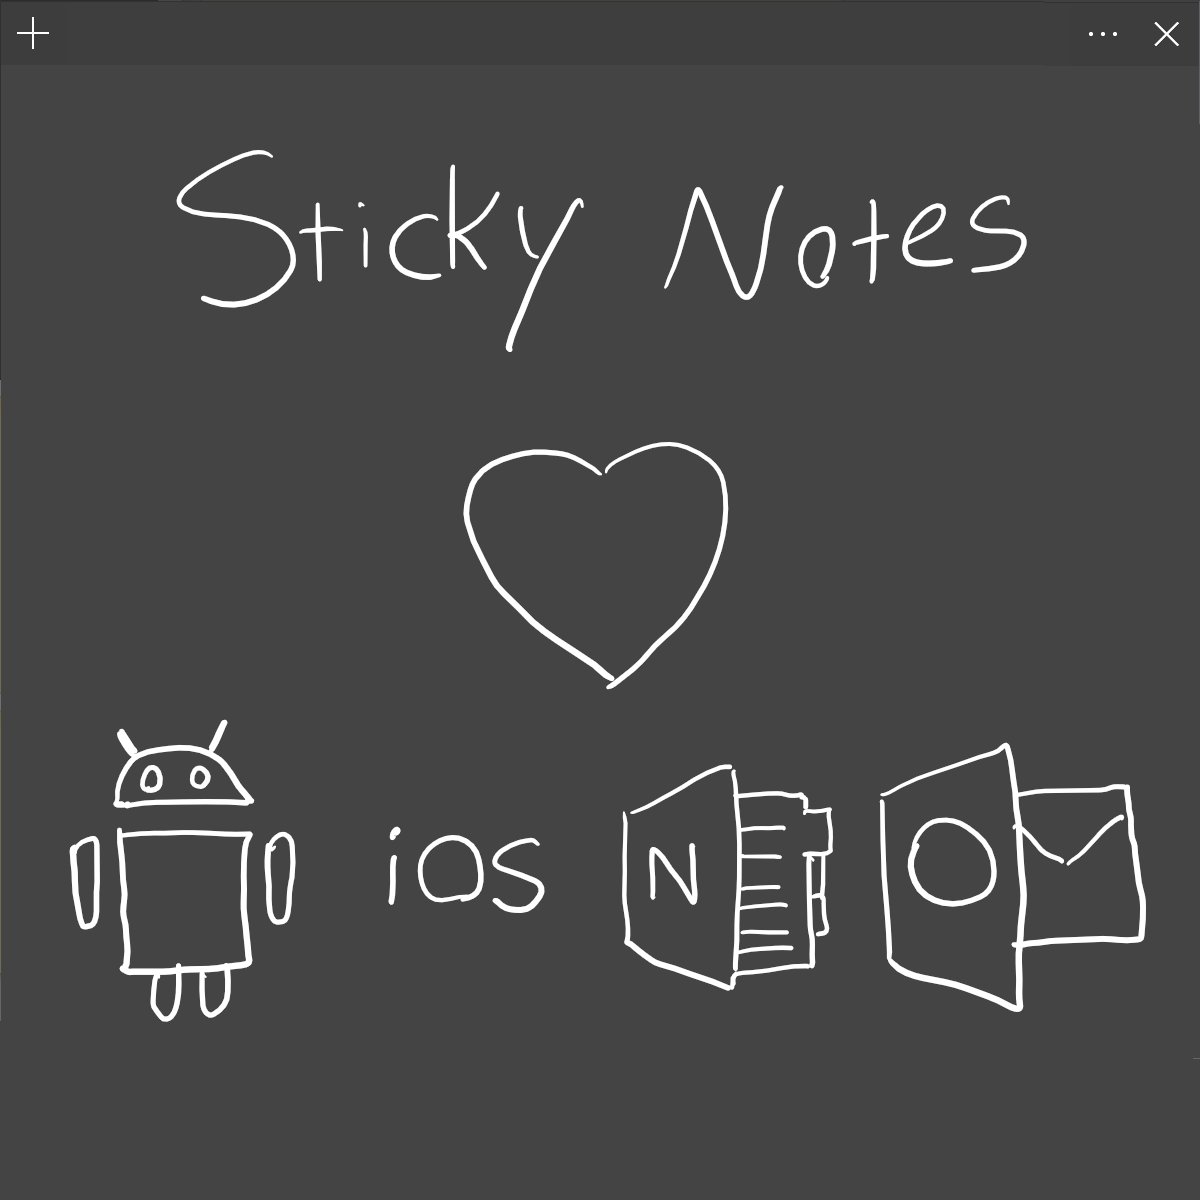 is microsoft sticky note available on android